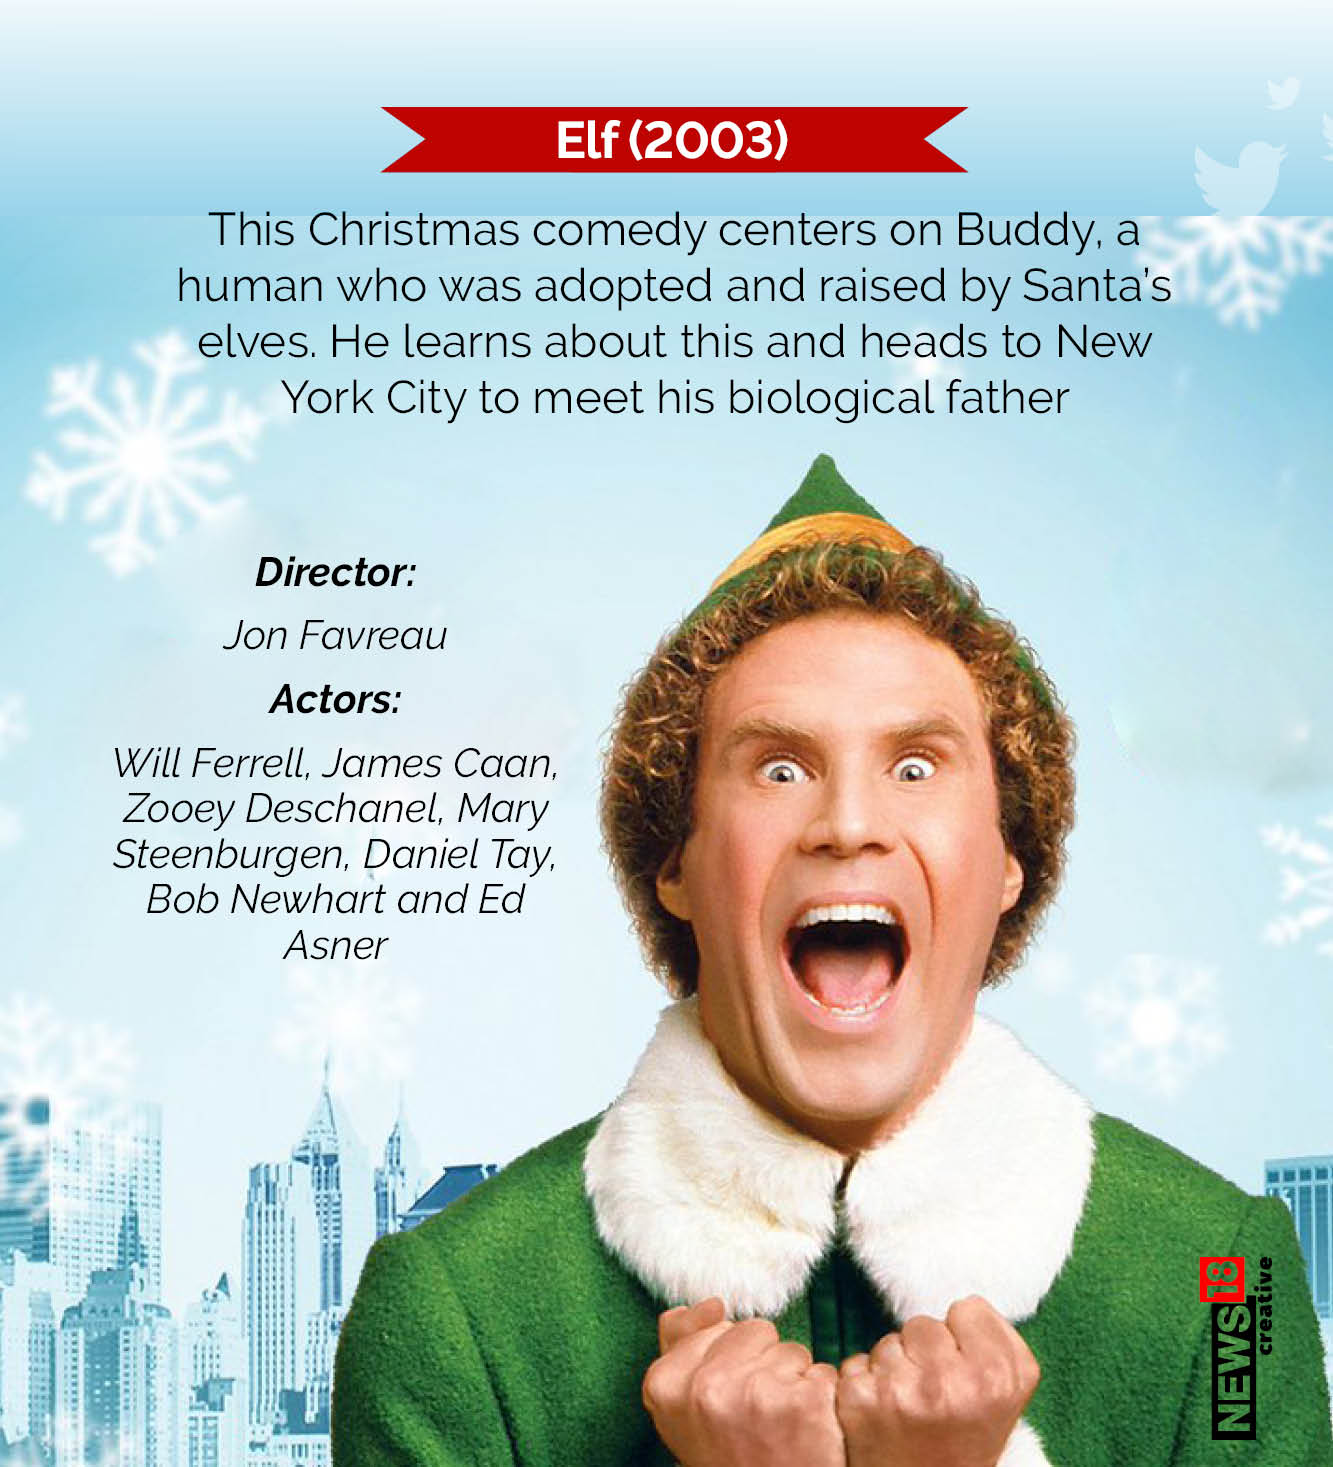 Best Christmas movies of all time: What's on your watchlist?